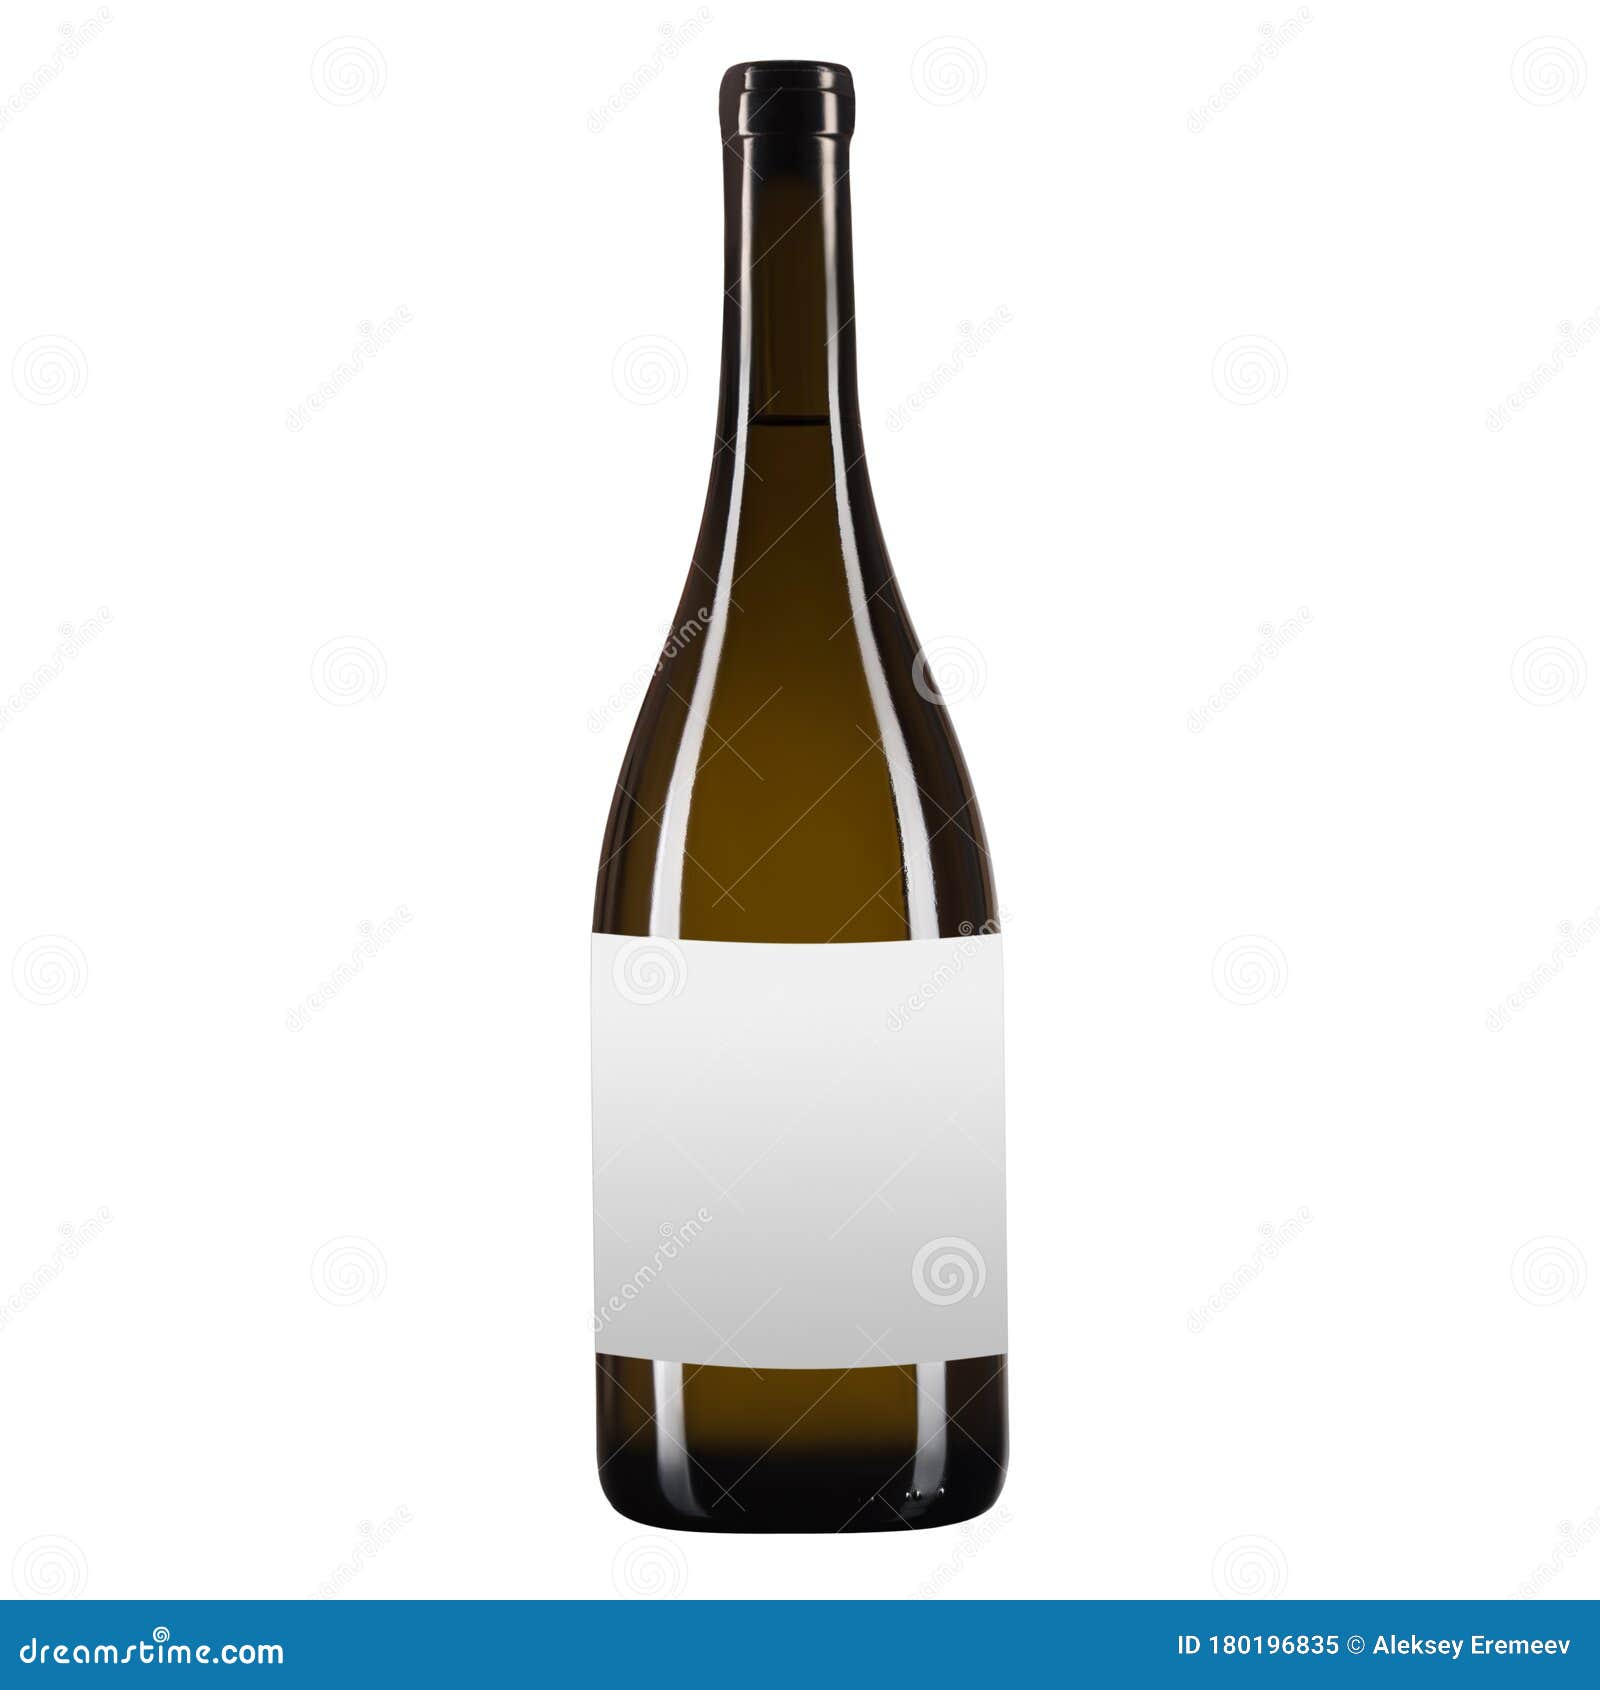 Download Empty Glass Wine Or Champagne Bottle With White Label For Mockup On White Isolated Background Square Frame Stock Image Image Of Clean Refreshment 180196835